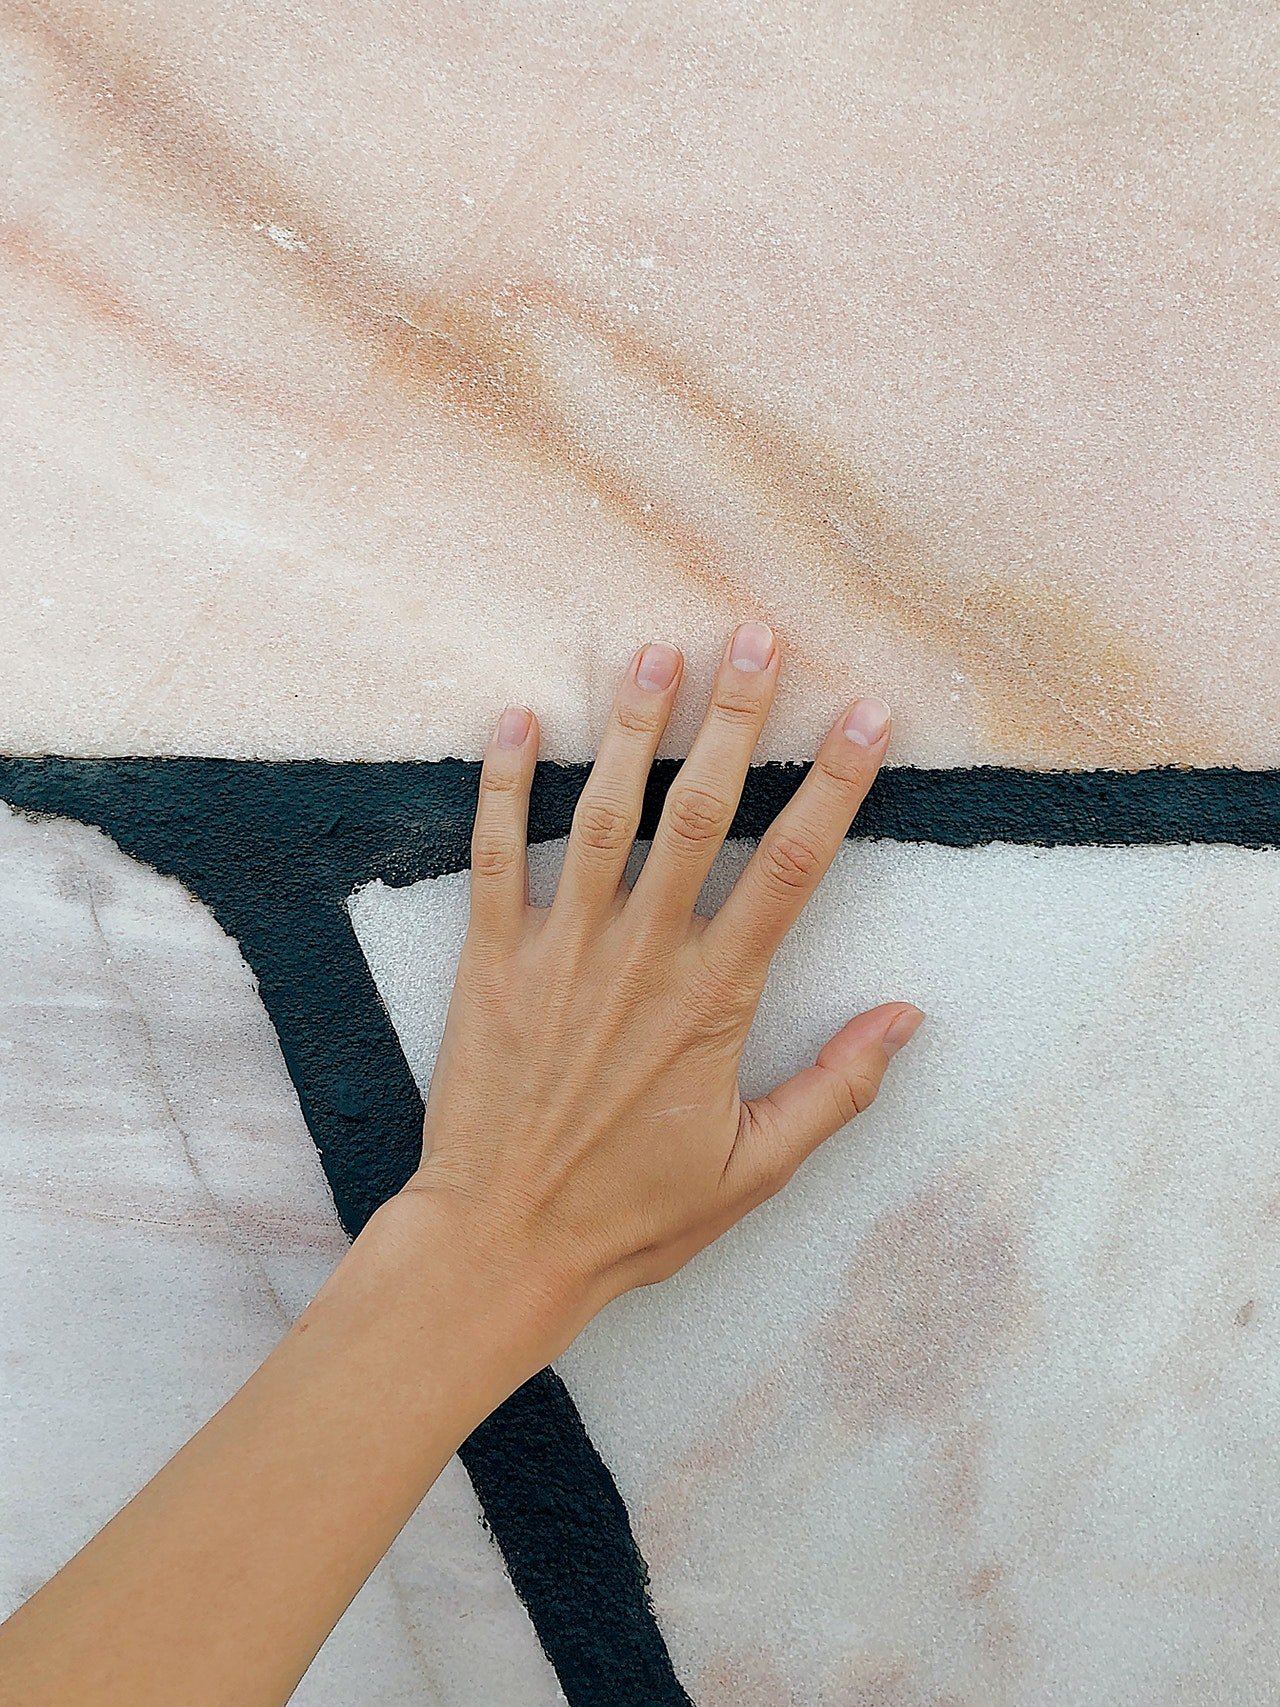 Sarah started to remove the wallpaper when she noticed something. | Source: Pexels